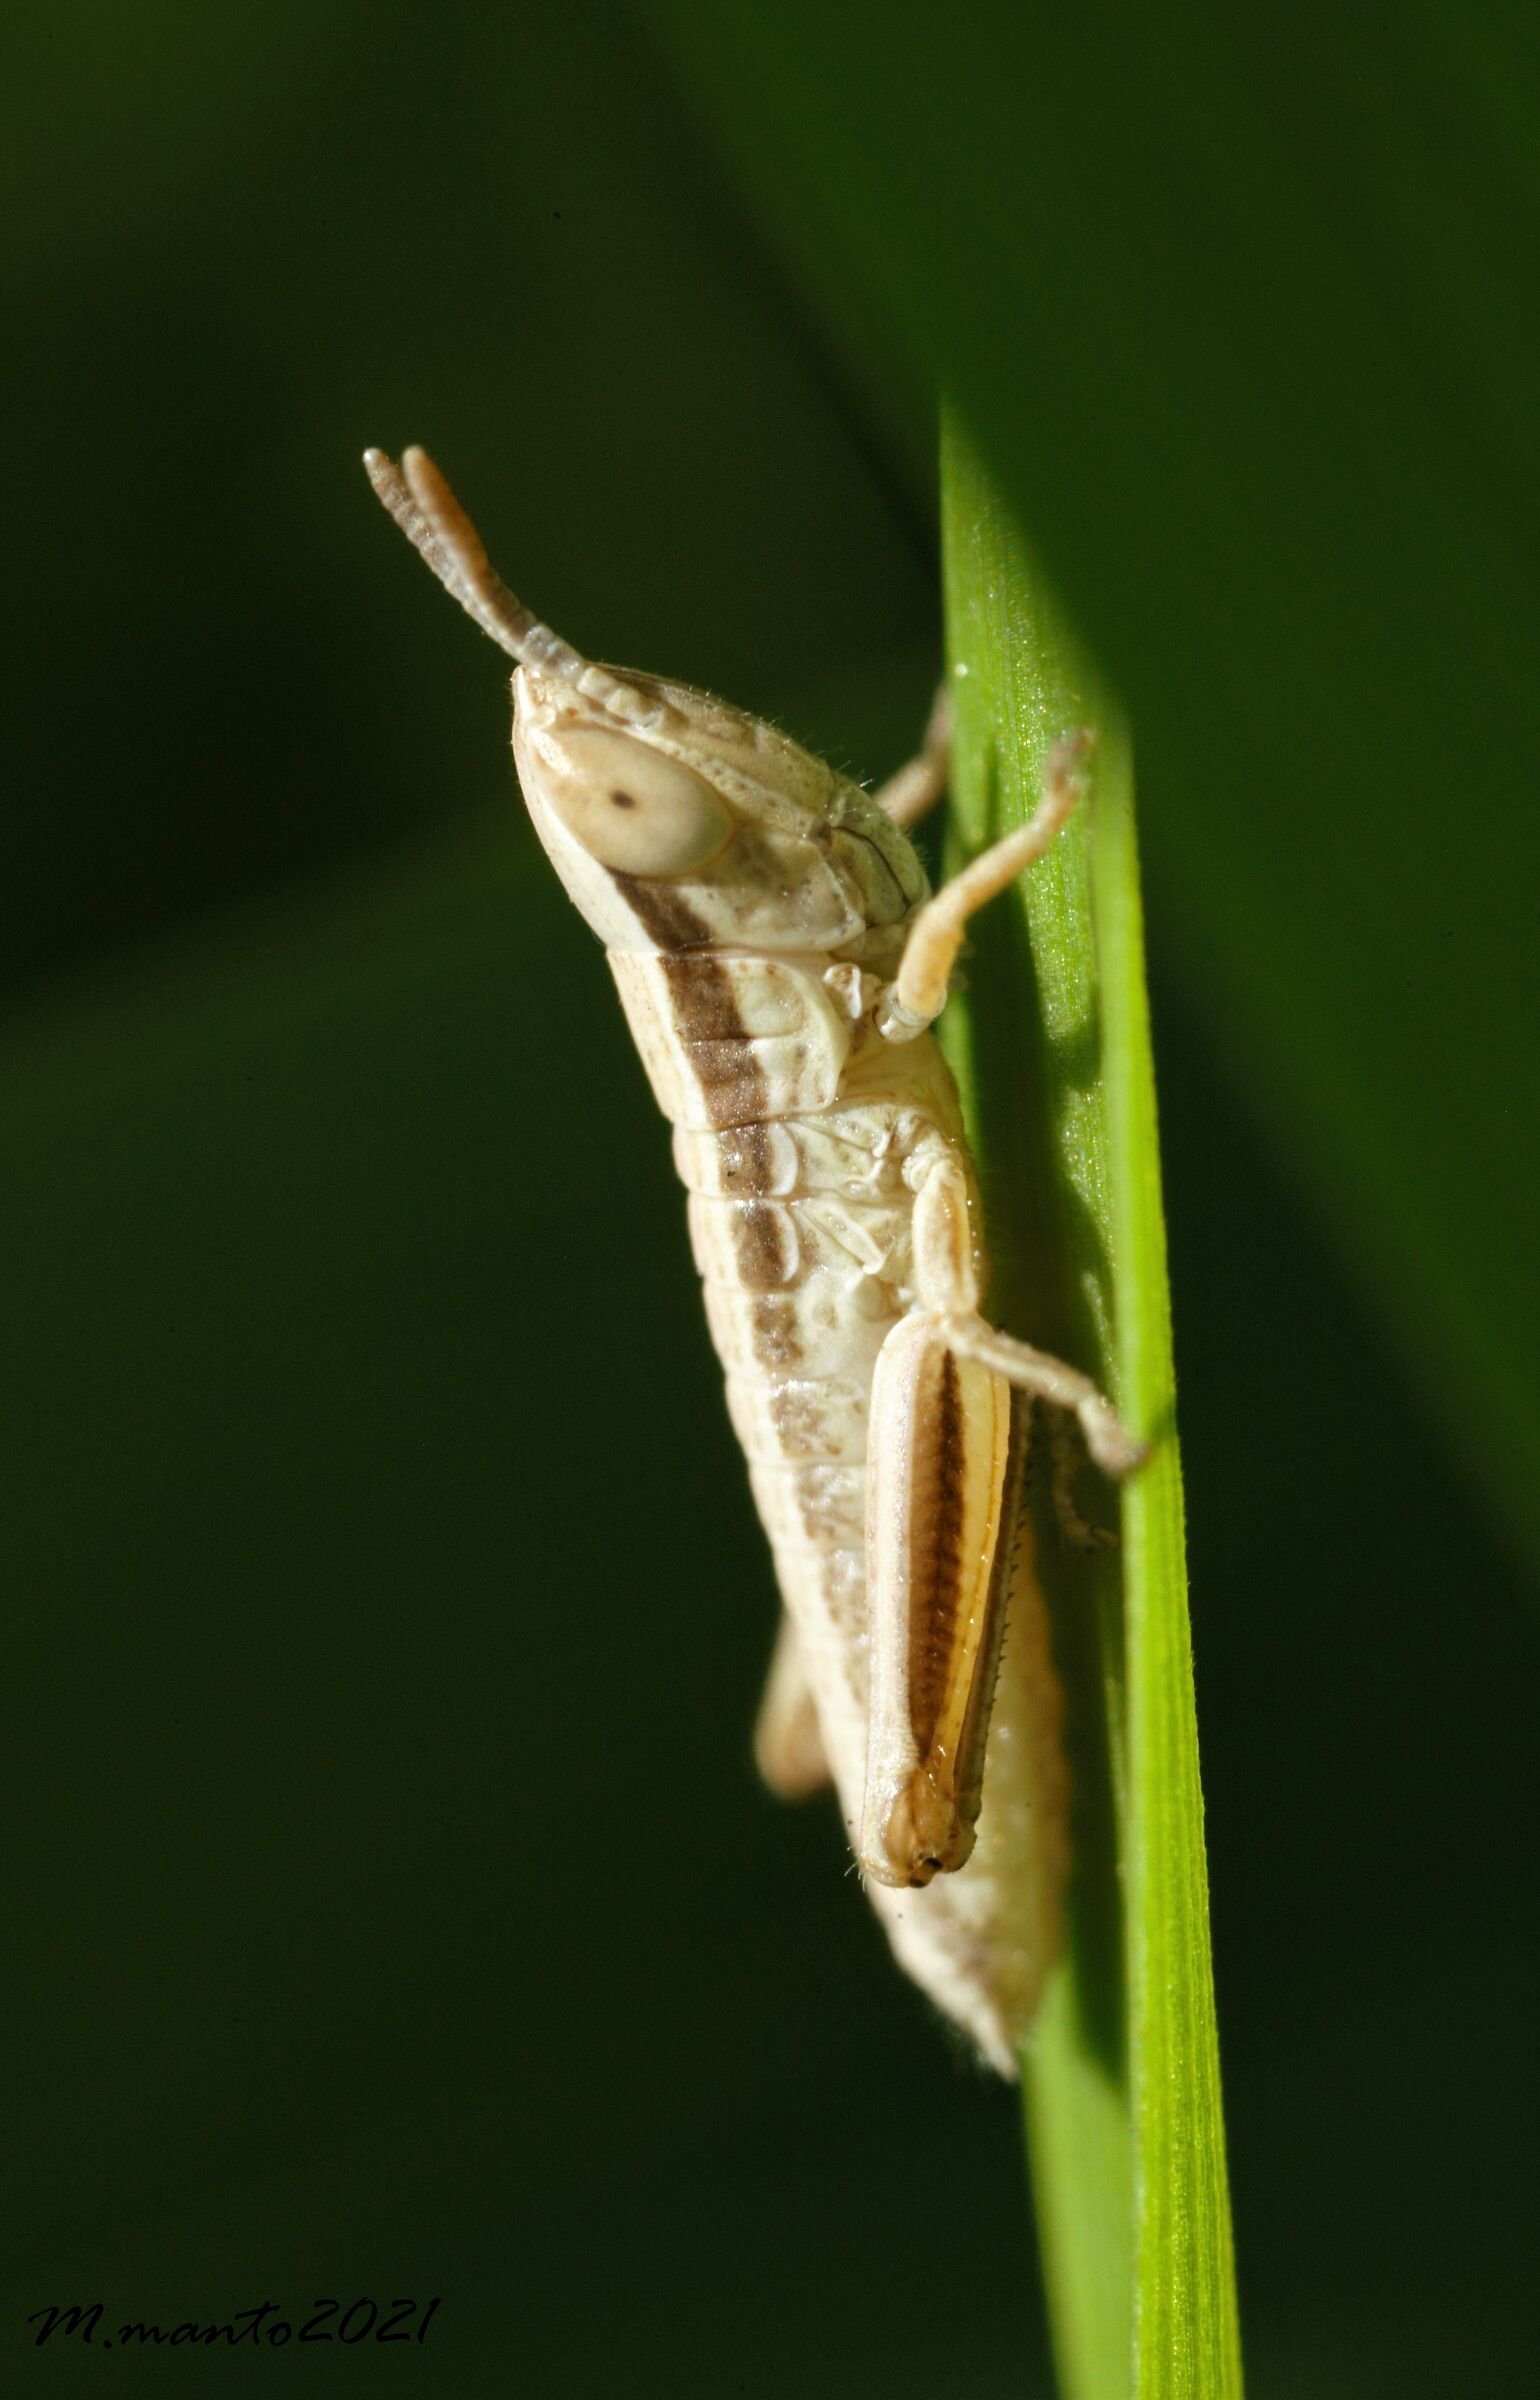 young orthopterus...